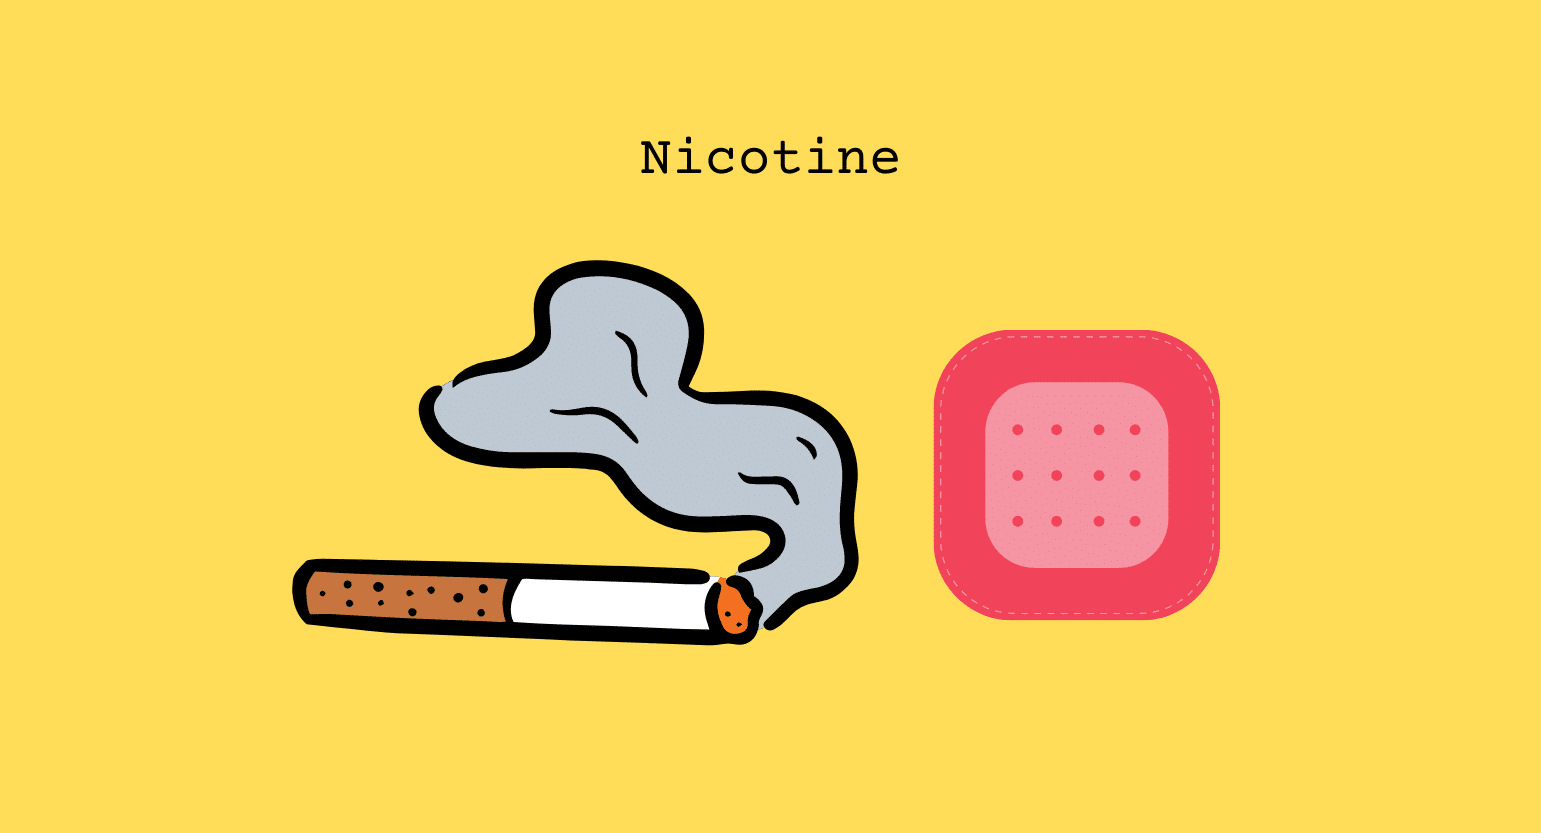 What’s The Deal With Combining Kratom and Nicotine?